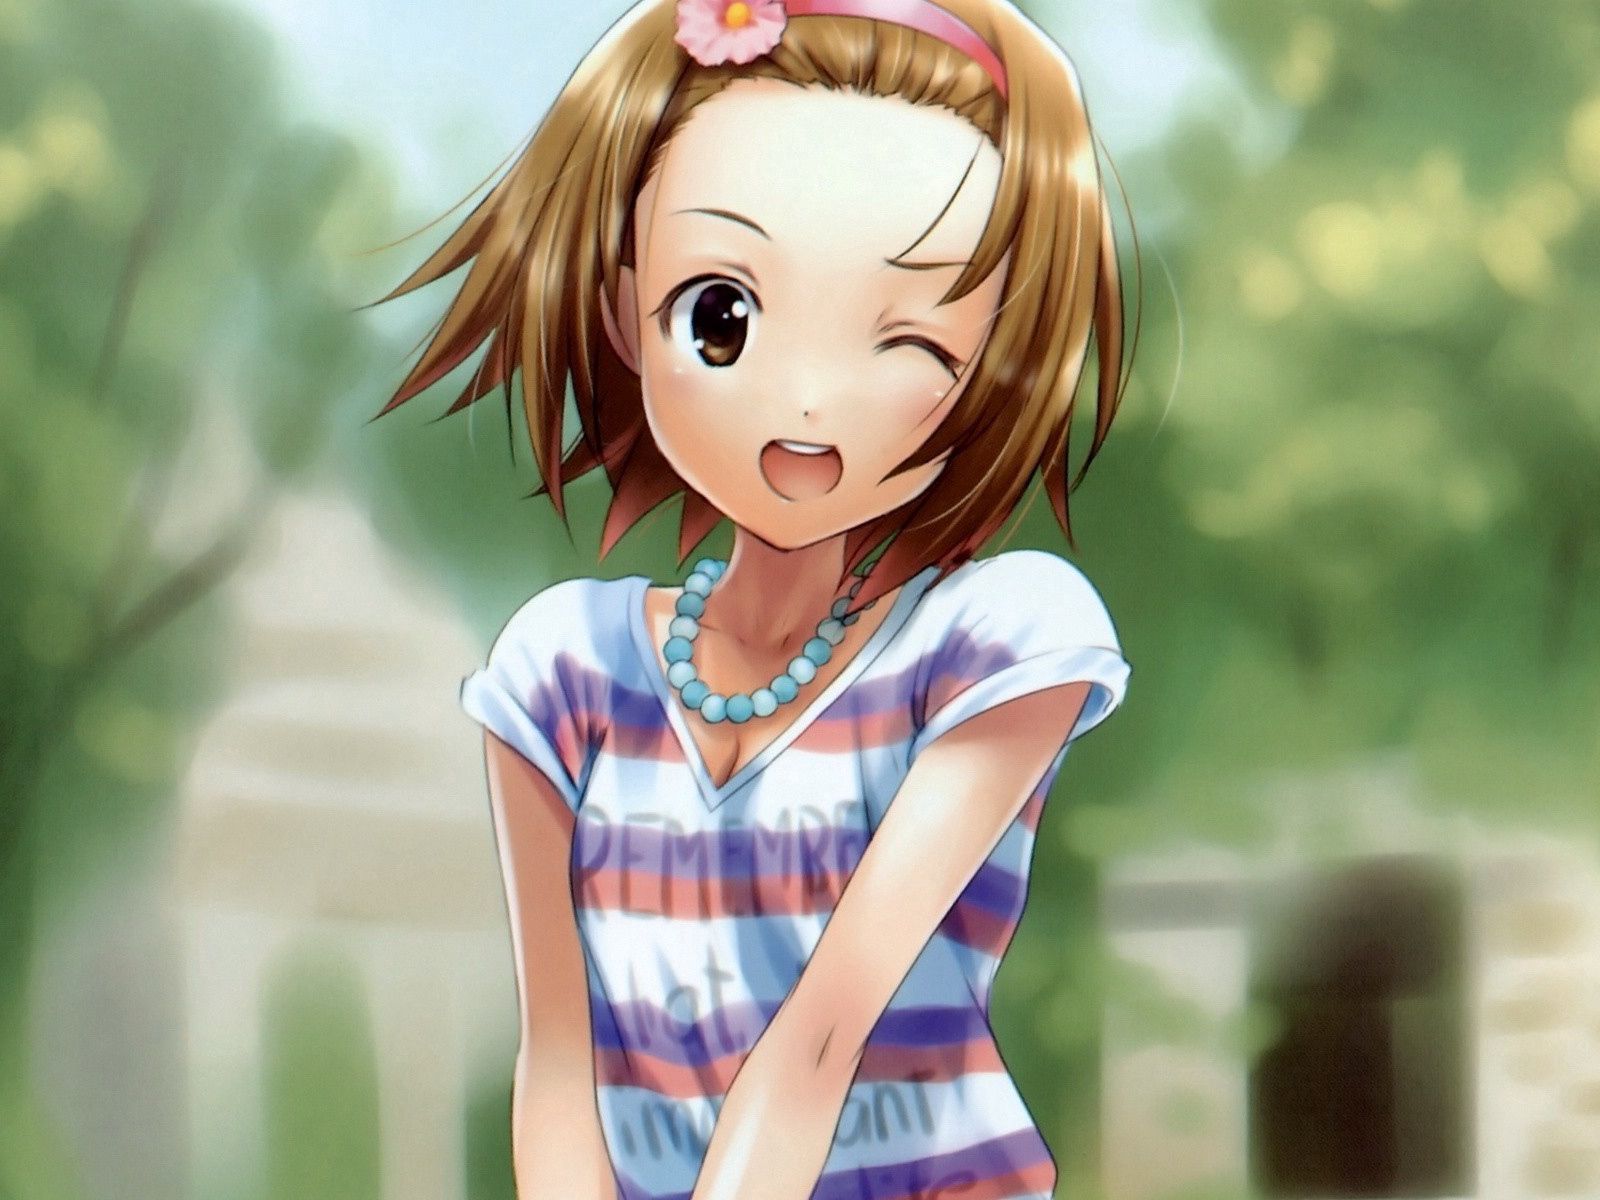 Download wallpaper 1600x1200 anime, girl, shirt, necklace, smiling